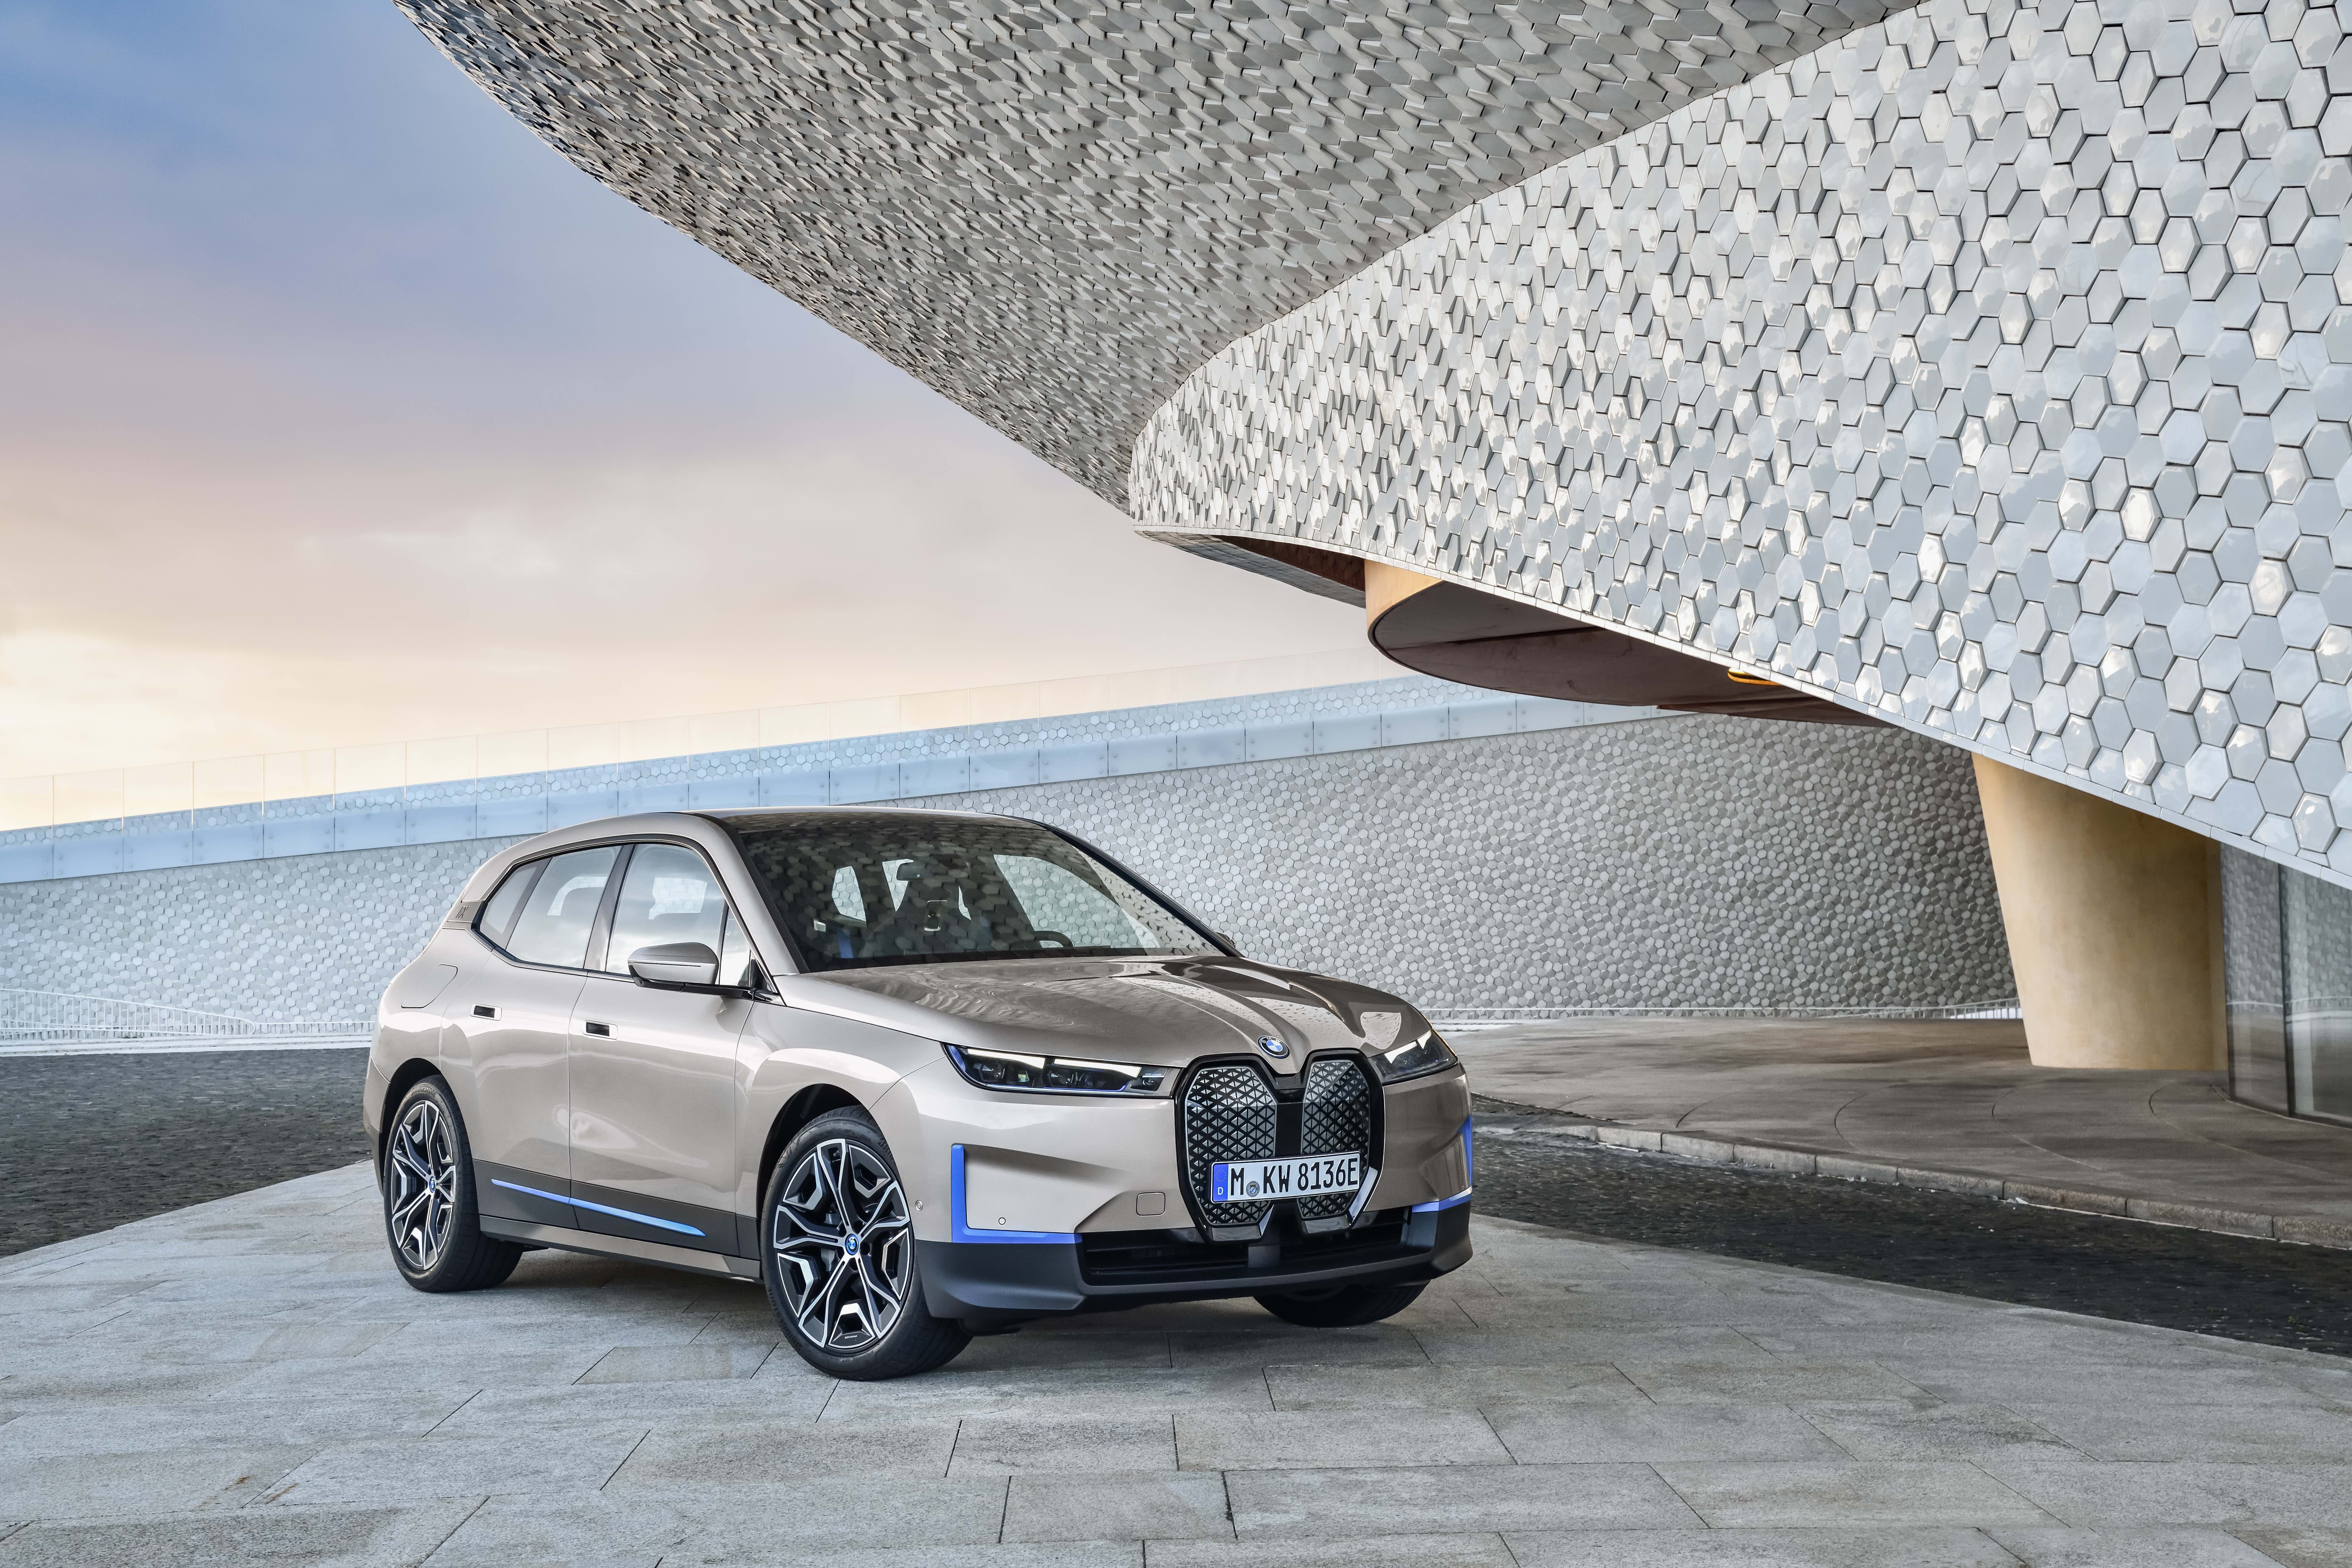 2022 BMW iX Electric Crossover Will Offer 500 HP, 300-Mile Range